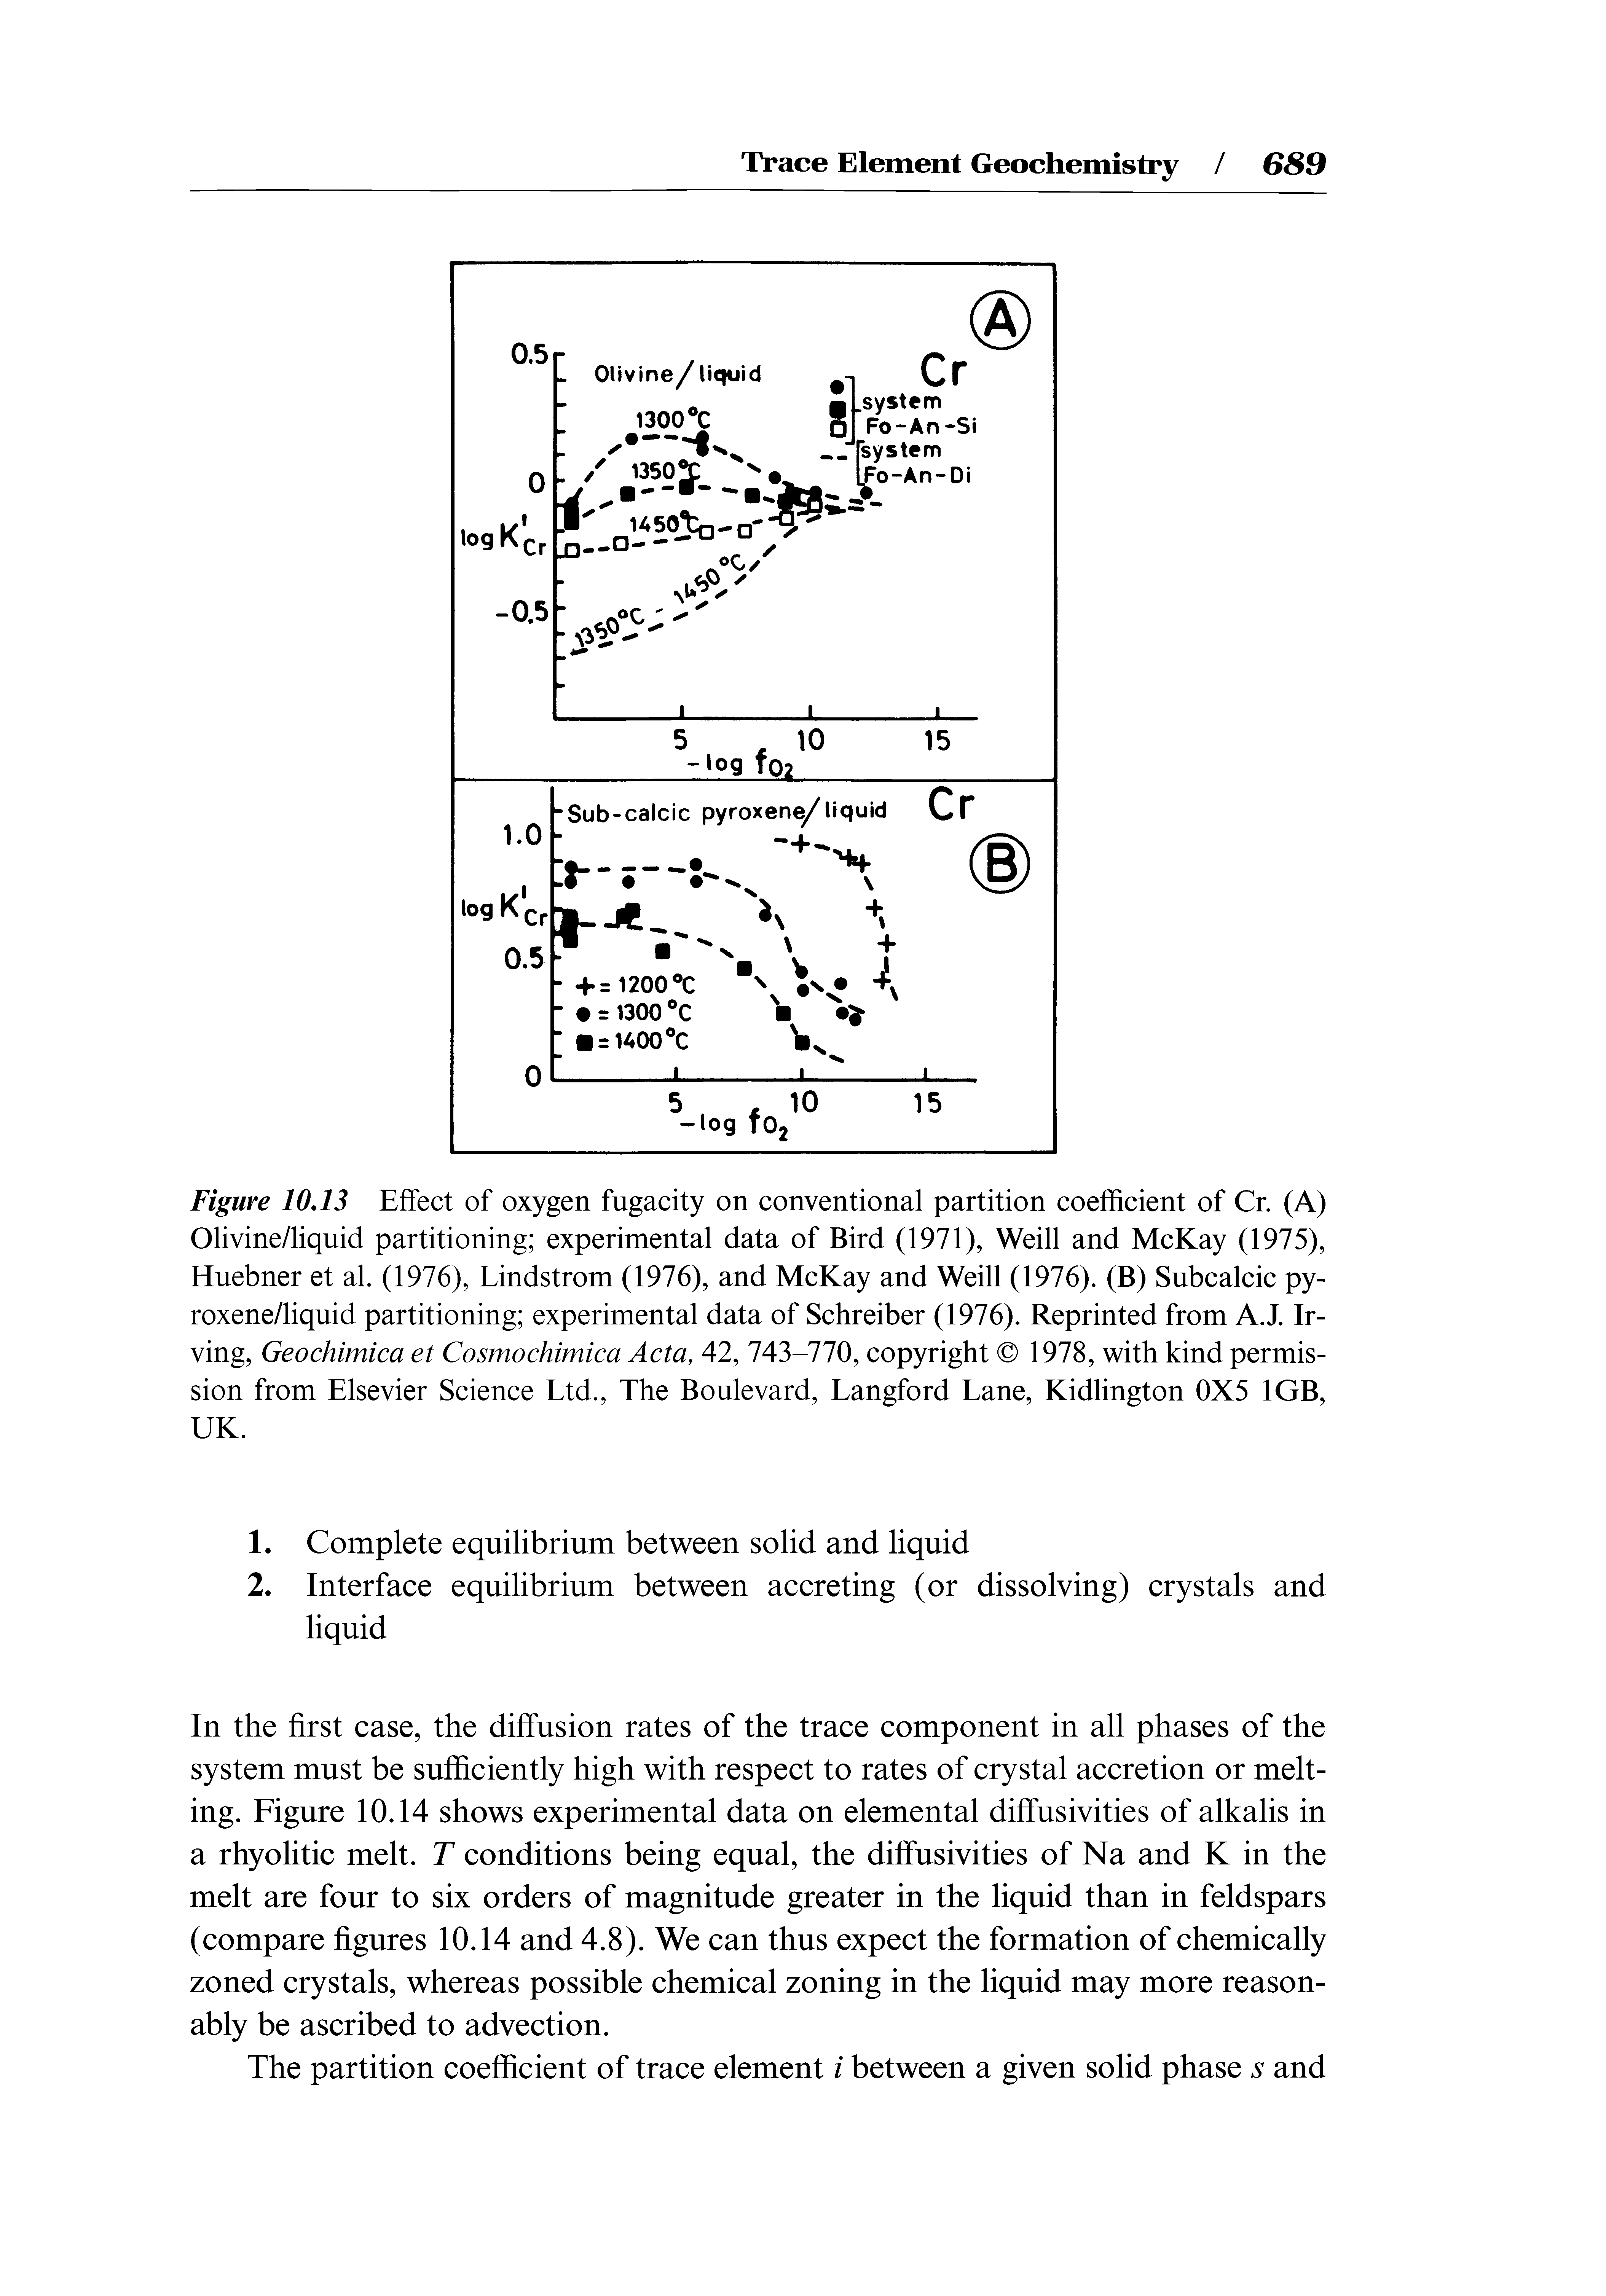 Figure 10.13 Effect of oxygen fugacity on conventional partition coefficient of Cr. (A) Olivine/liquid partitioning experimental data of Bird (1971), Weill and McKay (1975), Huebner et al. (1976), Lindstrom (1976), and McKay and Weill (1976). (B) Subcalcic py-roxene/liquid partitioning experimental data of Schreiber (1976). Reprinted from A.J. Irving, Geochimica et Cosmochimica Acta, 42, 743-770, copyright 1978, with kind permission from Elsevier Science Ltd., The Boulevard, Langford Lane, Kidlington 0X5 1GB, UK.